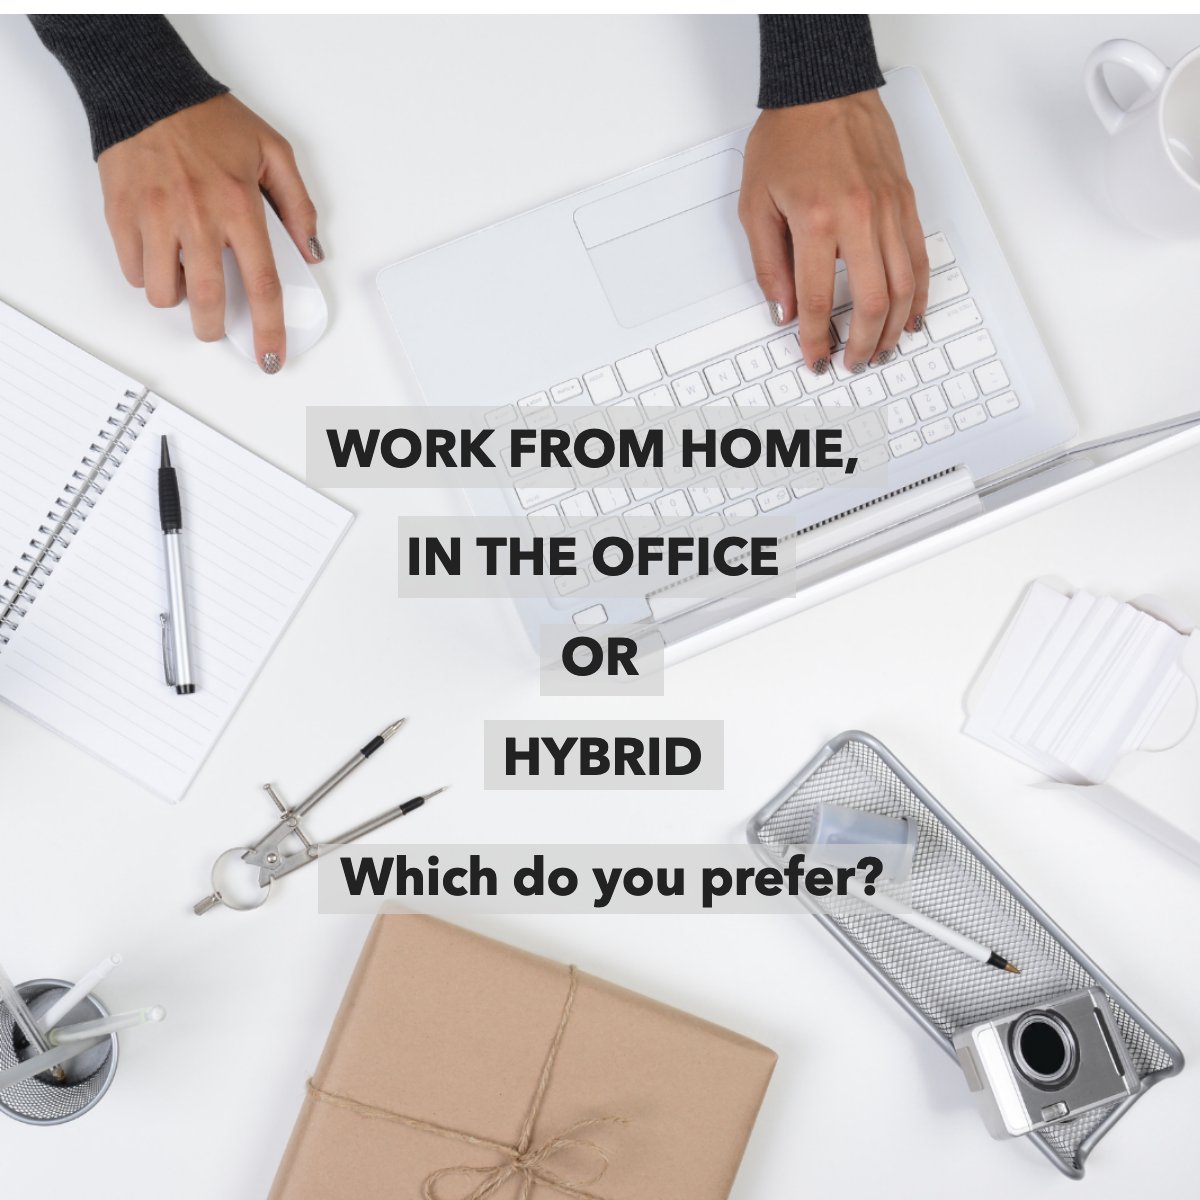 Do you have a dedicated working space? 💻
 
Tell us in the comments! 💭 

#question #workspace #worklife #homeoffice #hybridwork
 #swfl #oleglisitsyn #oleglis #sarasota #Florida #wearemvp #sarasotarealtor #waterfronthomes #luxuryhomes #floridahomes #SarasotaLuxury